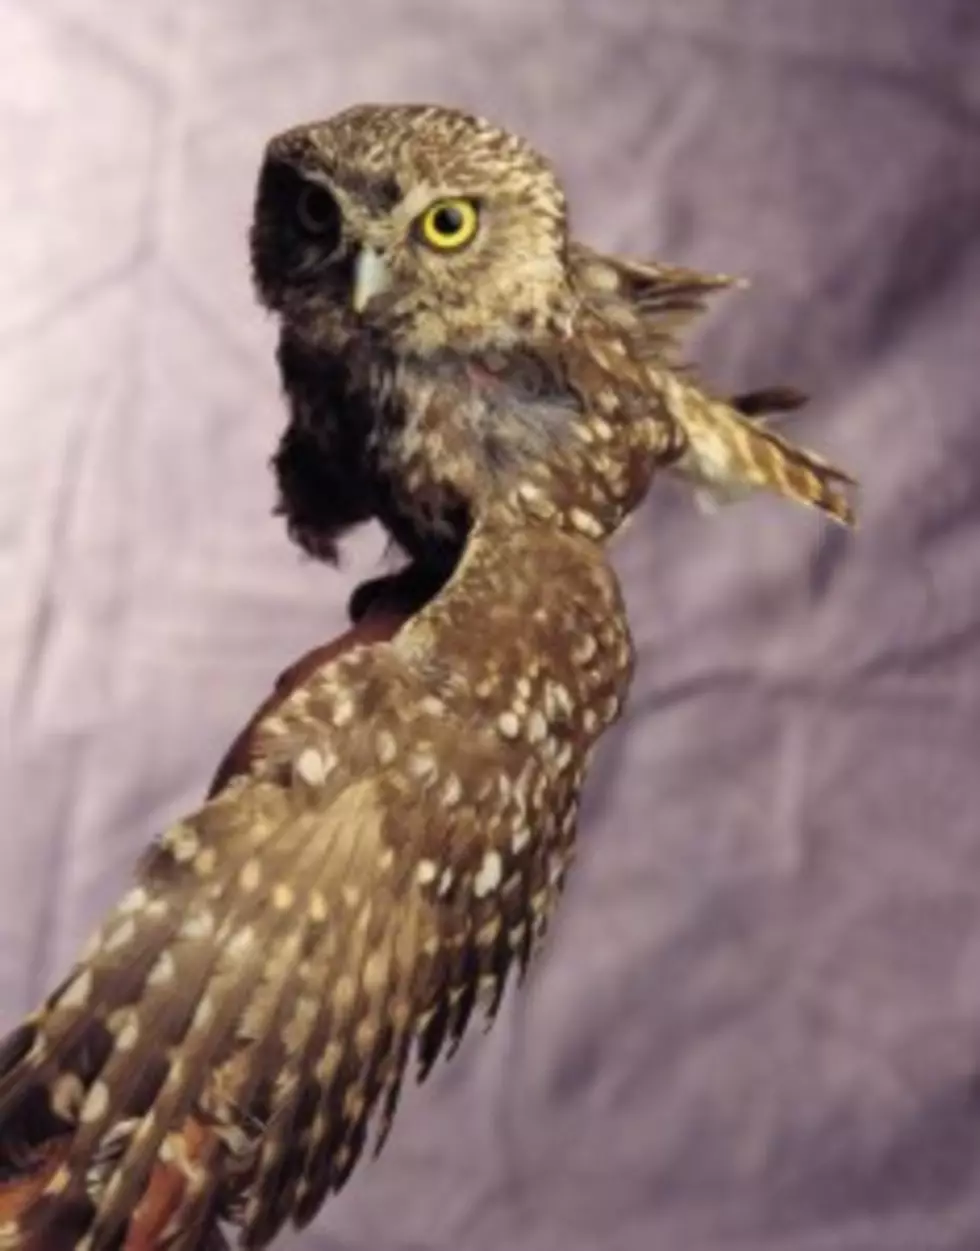 How to Get an Owl Out of the House(VIDEO)